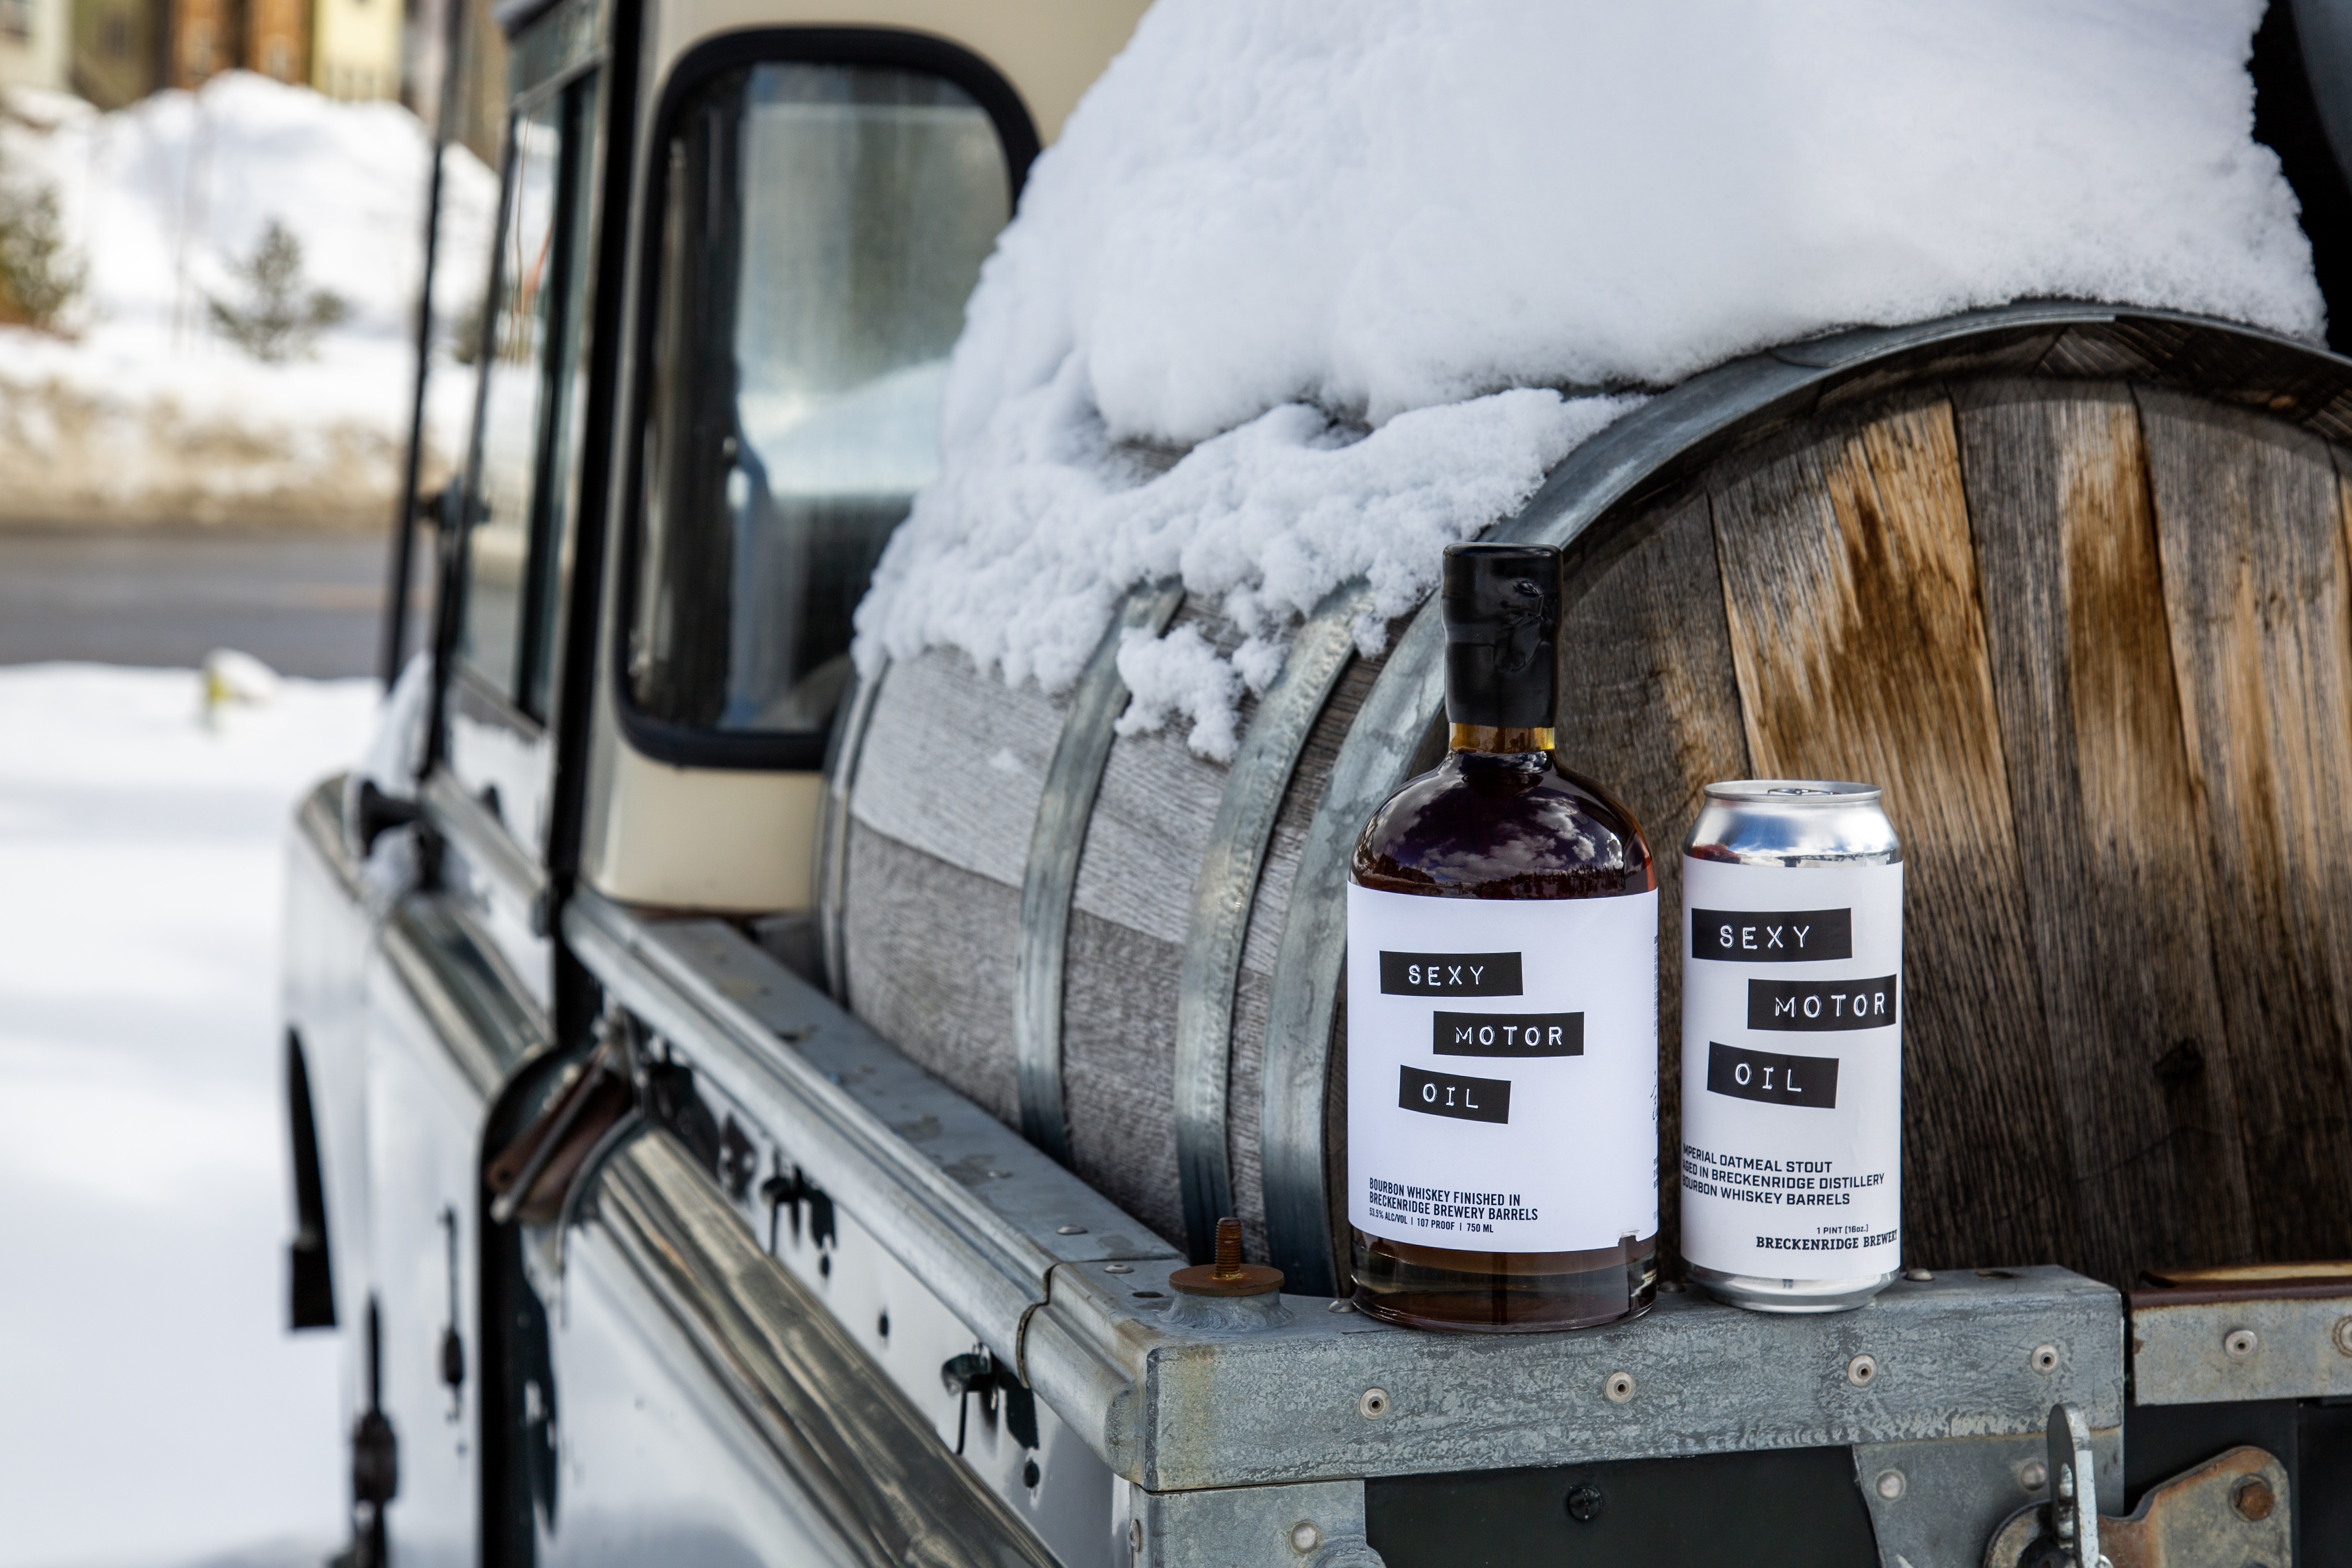 The two iconic Colorado brands have come together to bring the two new releases of Sexy Motor Oil to lovers of both whiskey and beer this Valentine’s